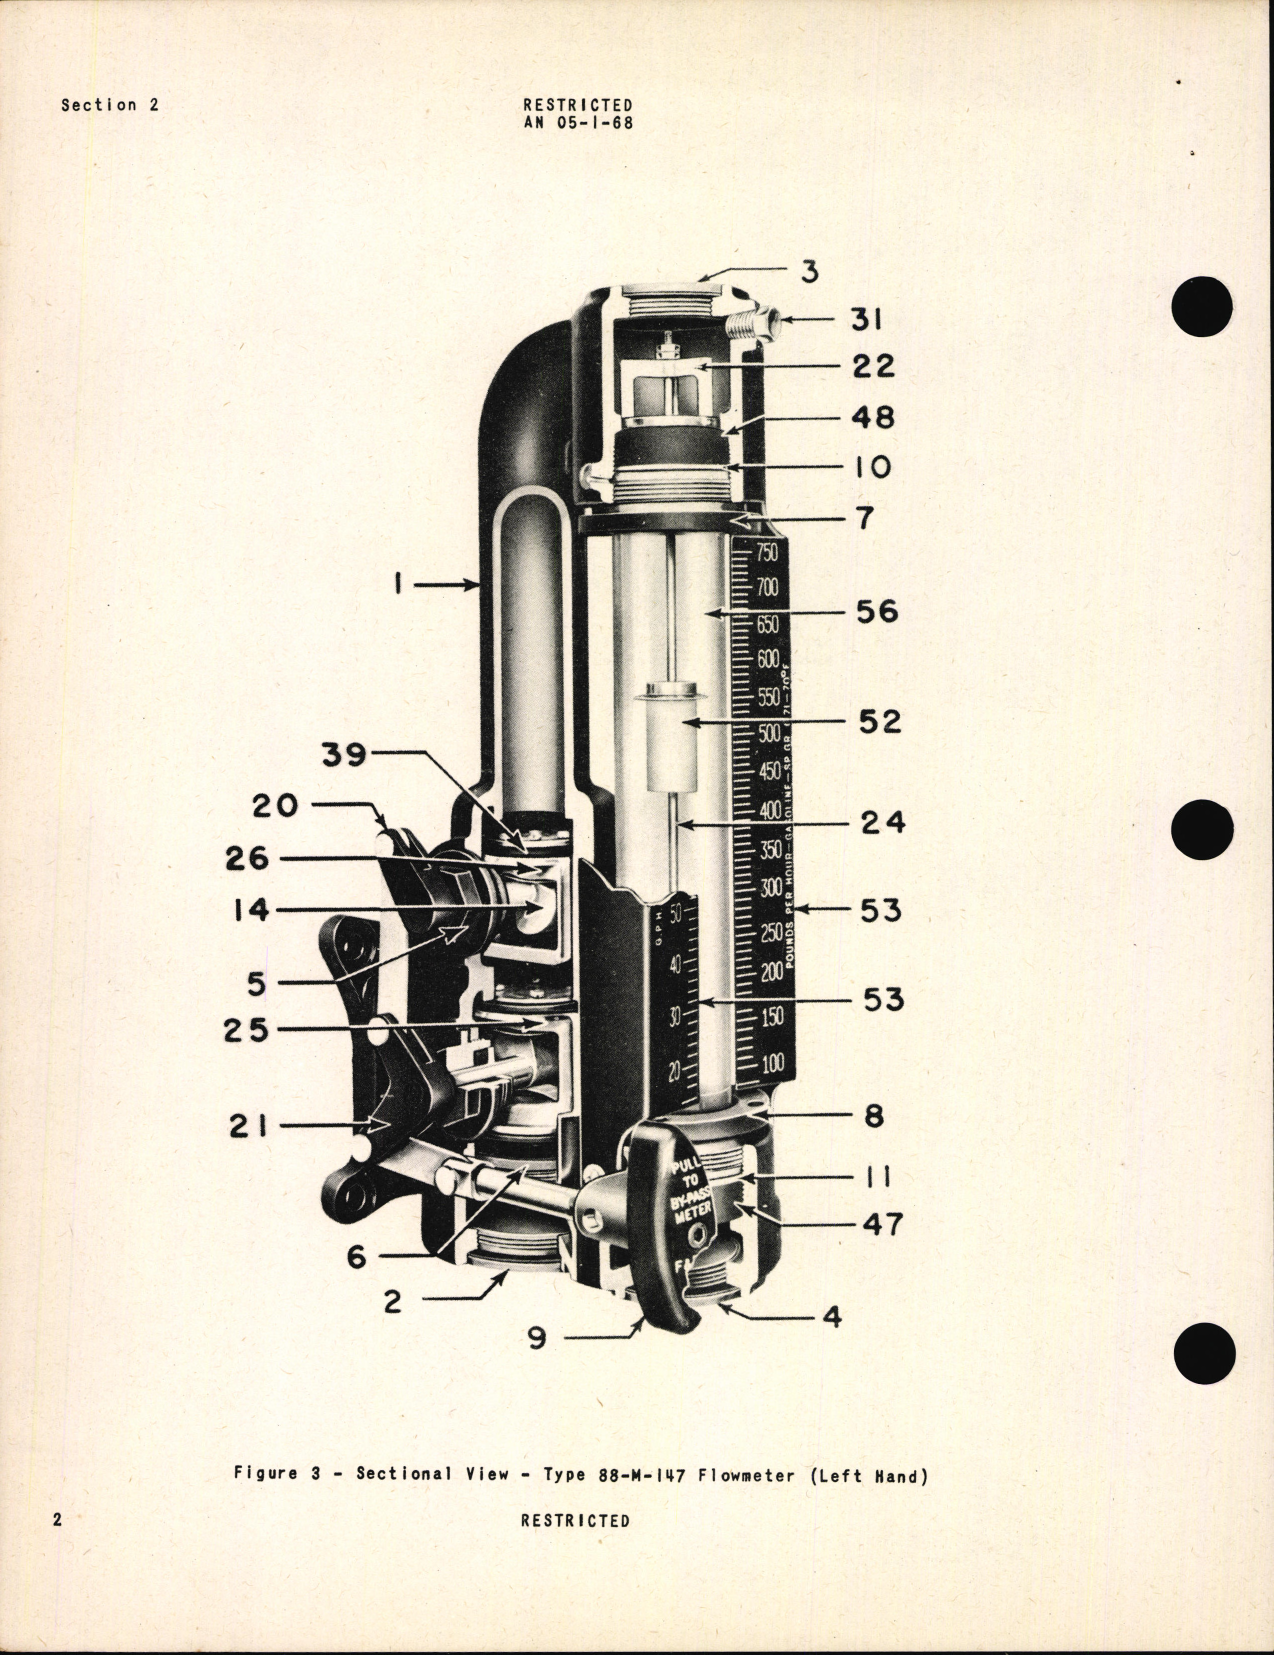 Sample page 8 from AirCorps Library document: Handbook of Instructions with Parts Catalog for FSSC-88-M-147 and FSSC-88-M-148 Fuel Flowmeters